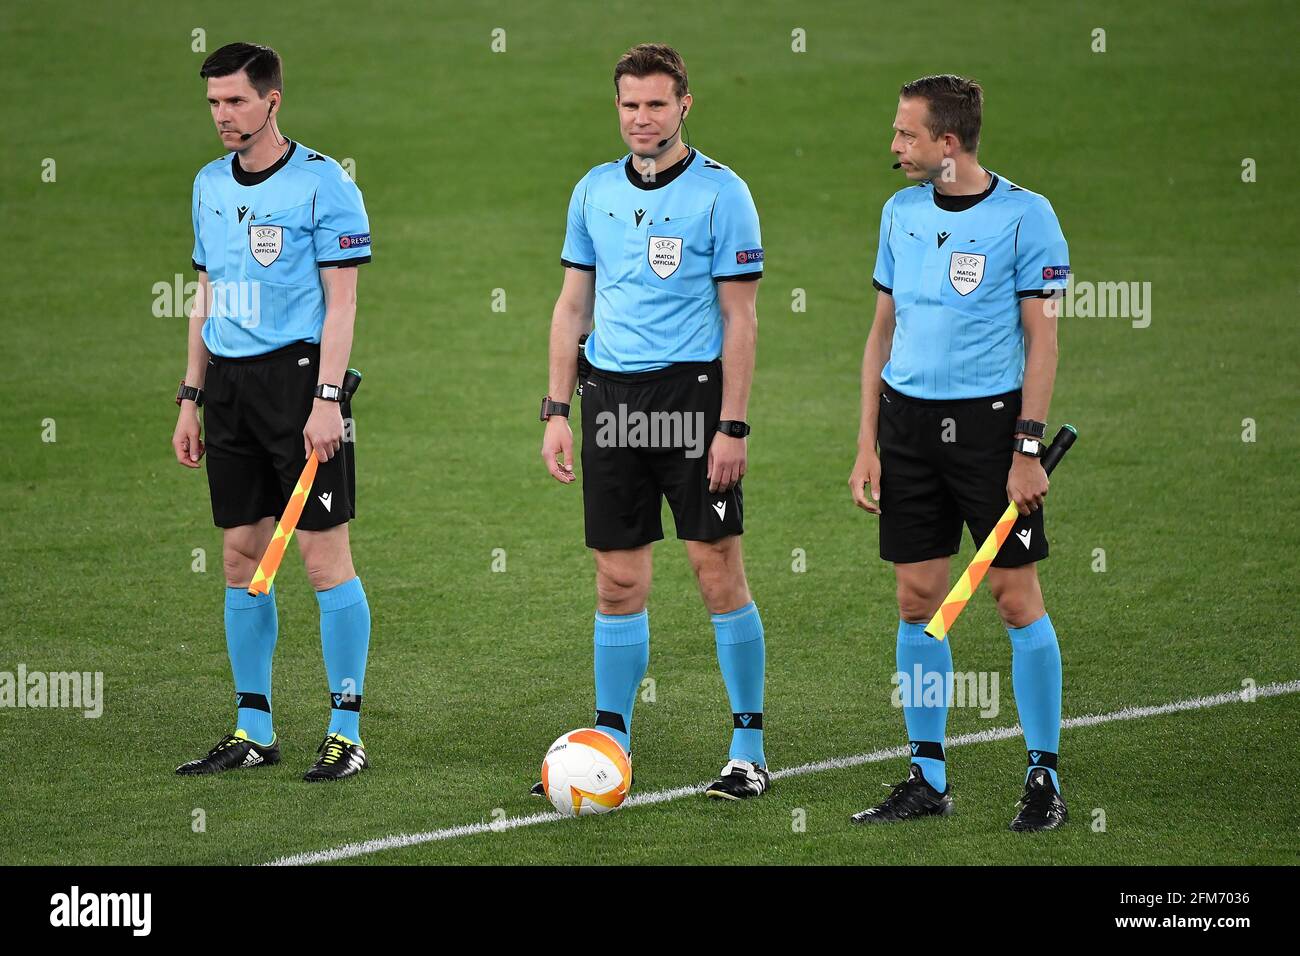 Rome, Italy. 06th May, 2021. Referee Paul Brych (c) and assistants Mark Borsch and Stefan Lupp during the Europa League semi-finals 2nd leg football match between AS Roma and Manchester United at stadio Olimpico in Rome (Italy), May, 6th, 2021. Photo Antonietta Baldassarre/Insidefoto Credit: insidefoto srl/Alamy Live News Stock Photo